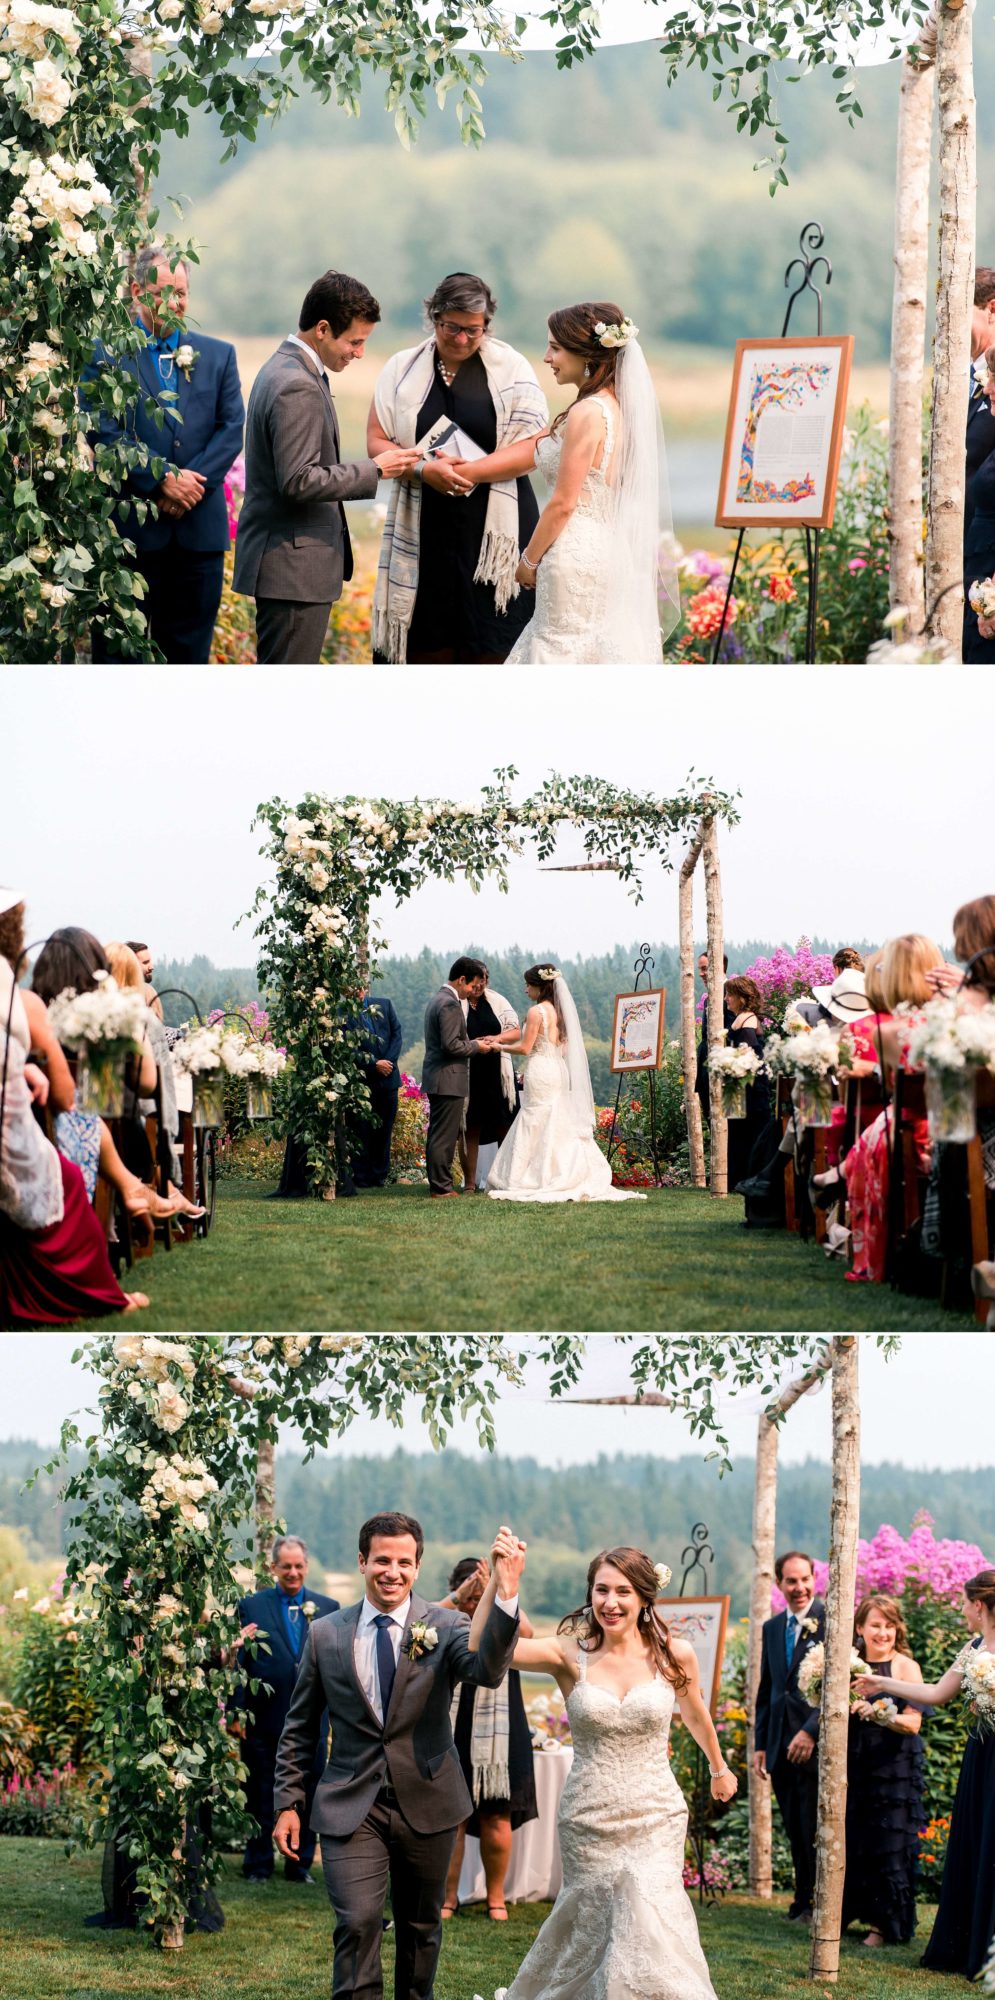 bride and groom exchanging rings under flower arbor during wedding ceremony